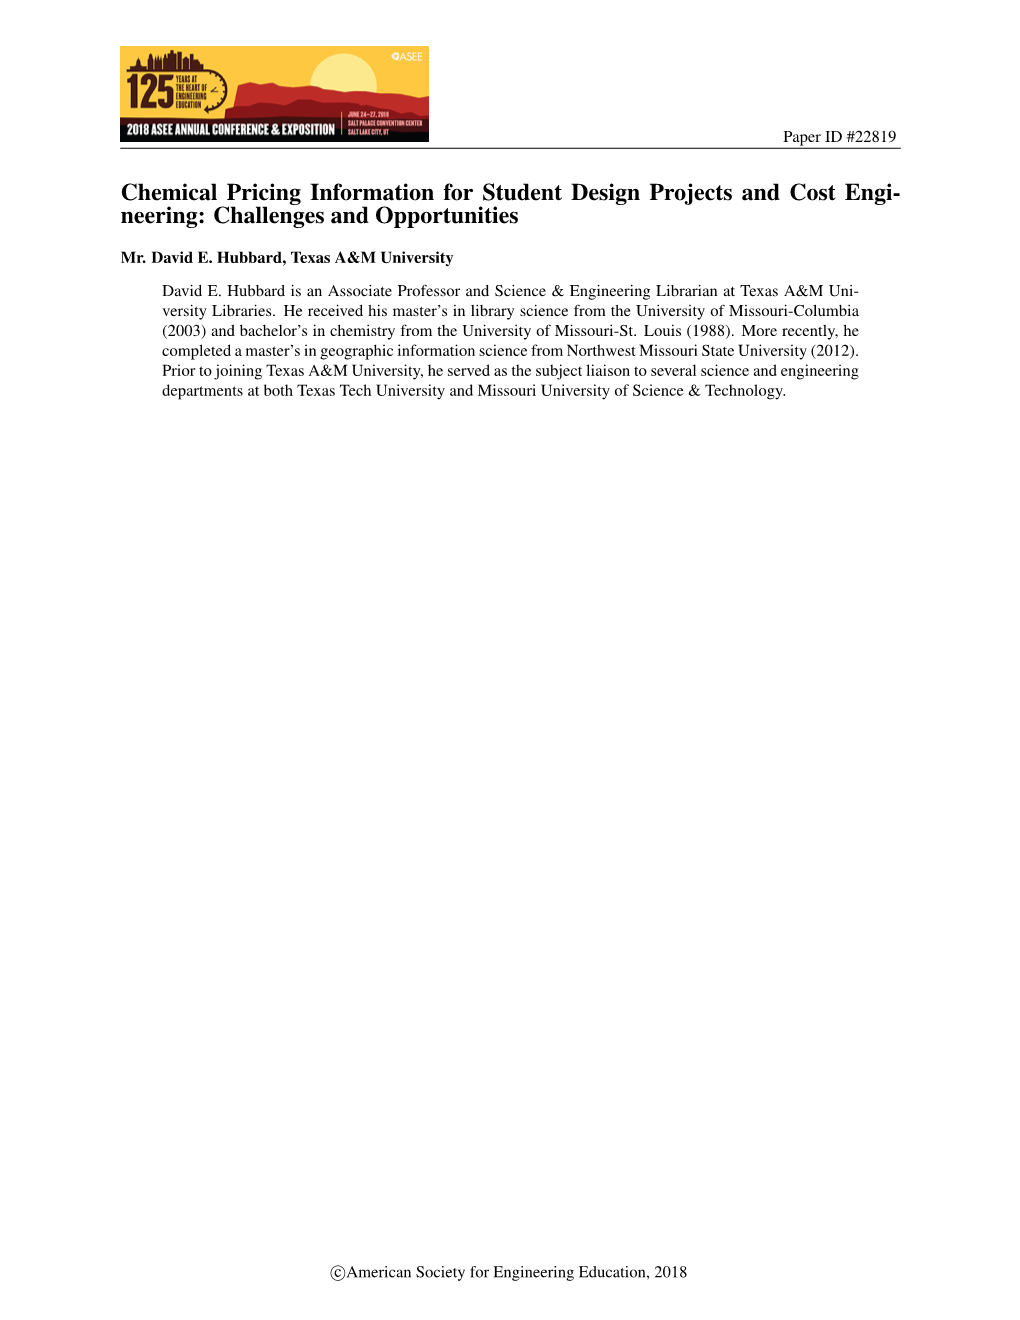 Chemical Pricing Information for Student Design Projects and Cost Engi- Neering: Challenges and Opportunities